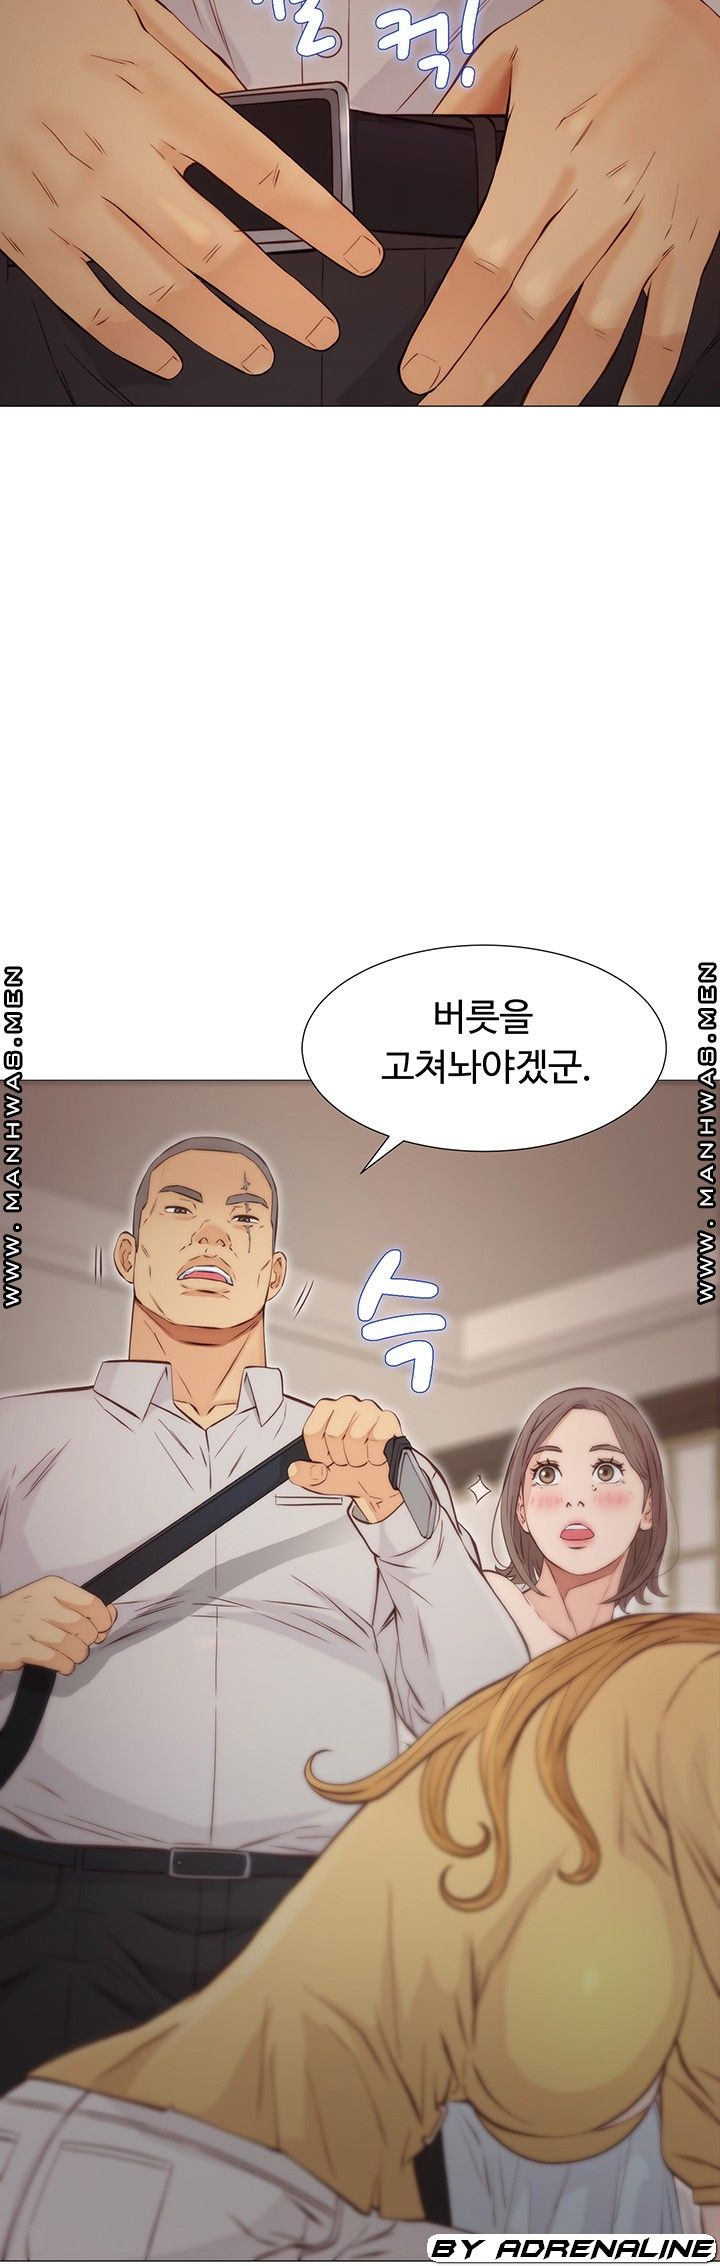 Gamble Raw - Chapter 53 Page 14